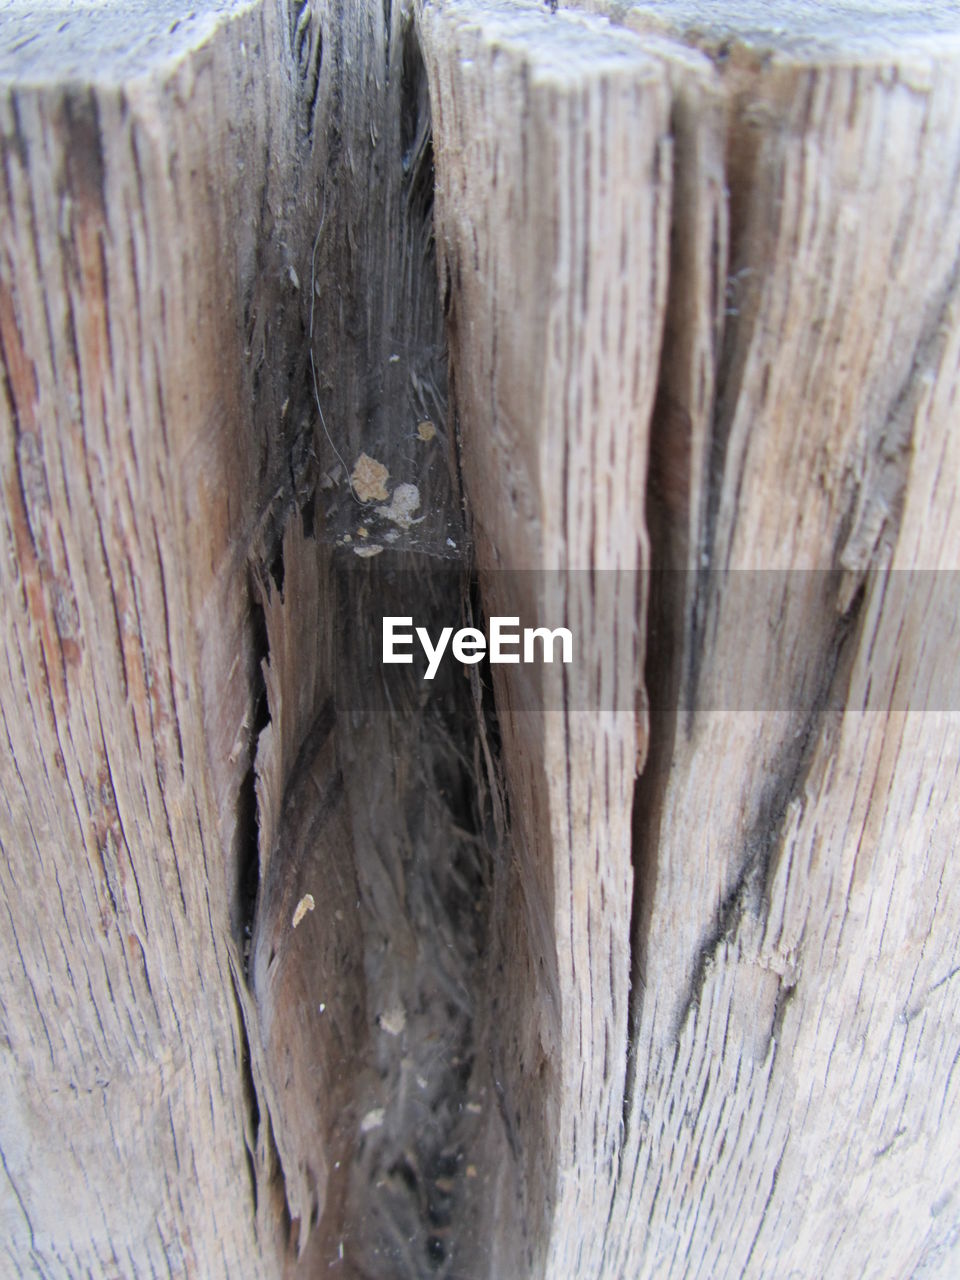 VIEW OF WOOD